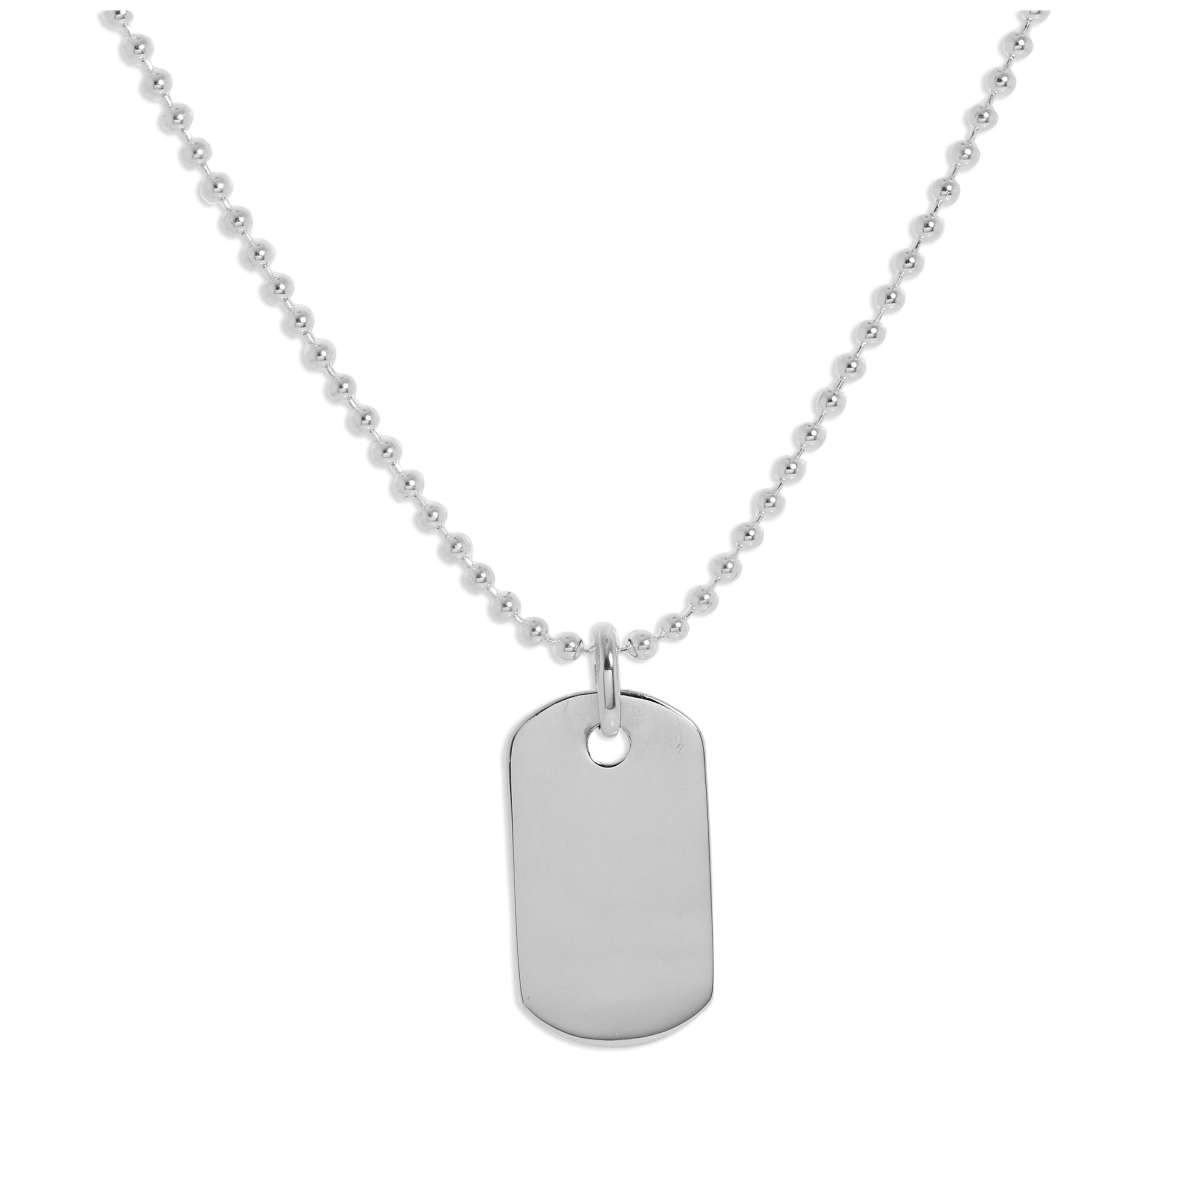 Women's Dog Tag Necklace
 Sterling Silver Plain Engravable Dog Tag Pendant Necklace